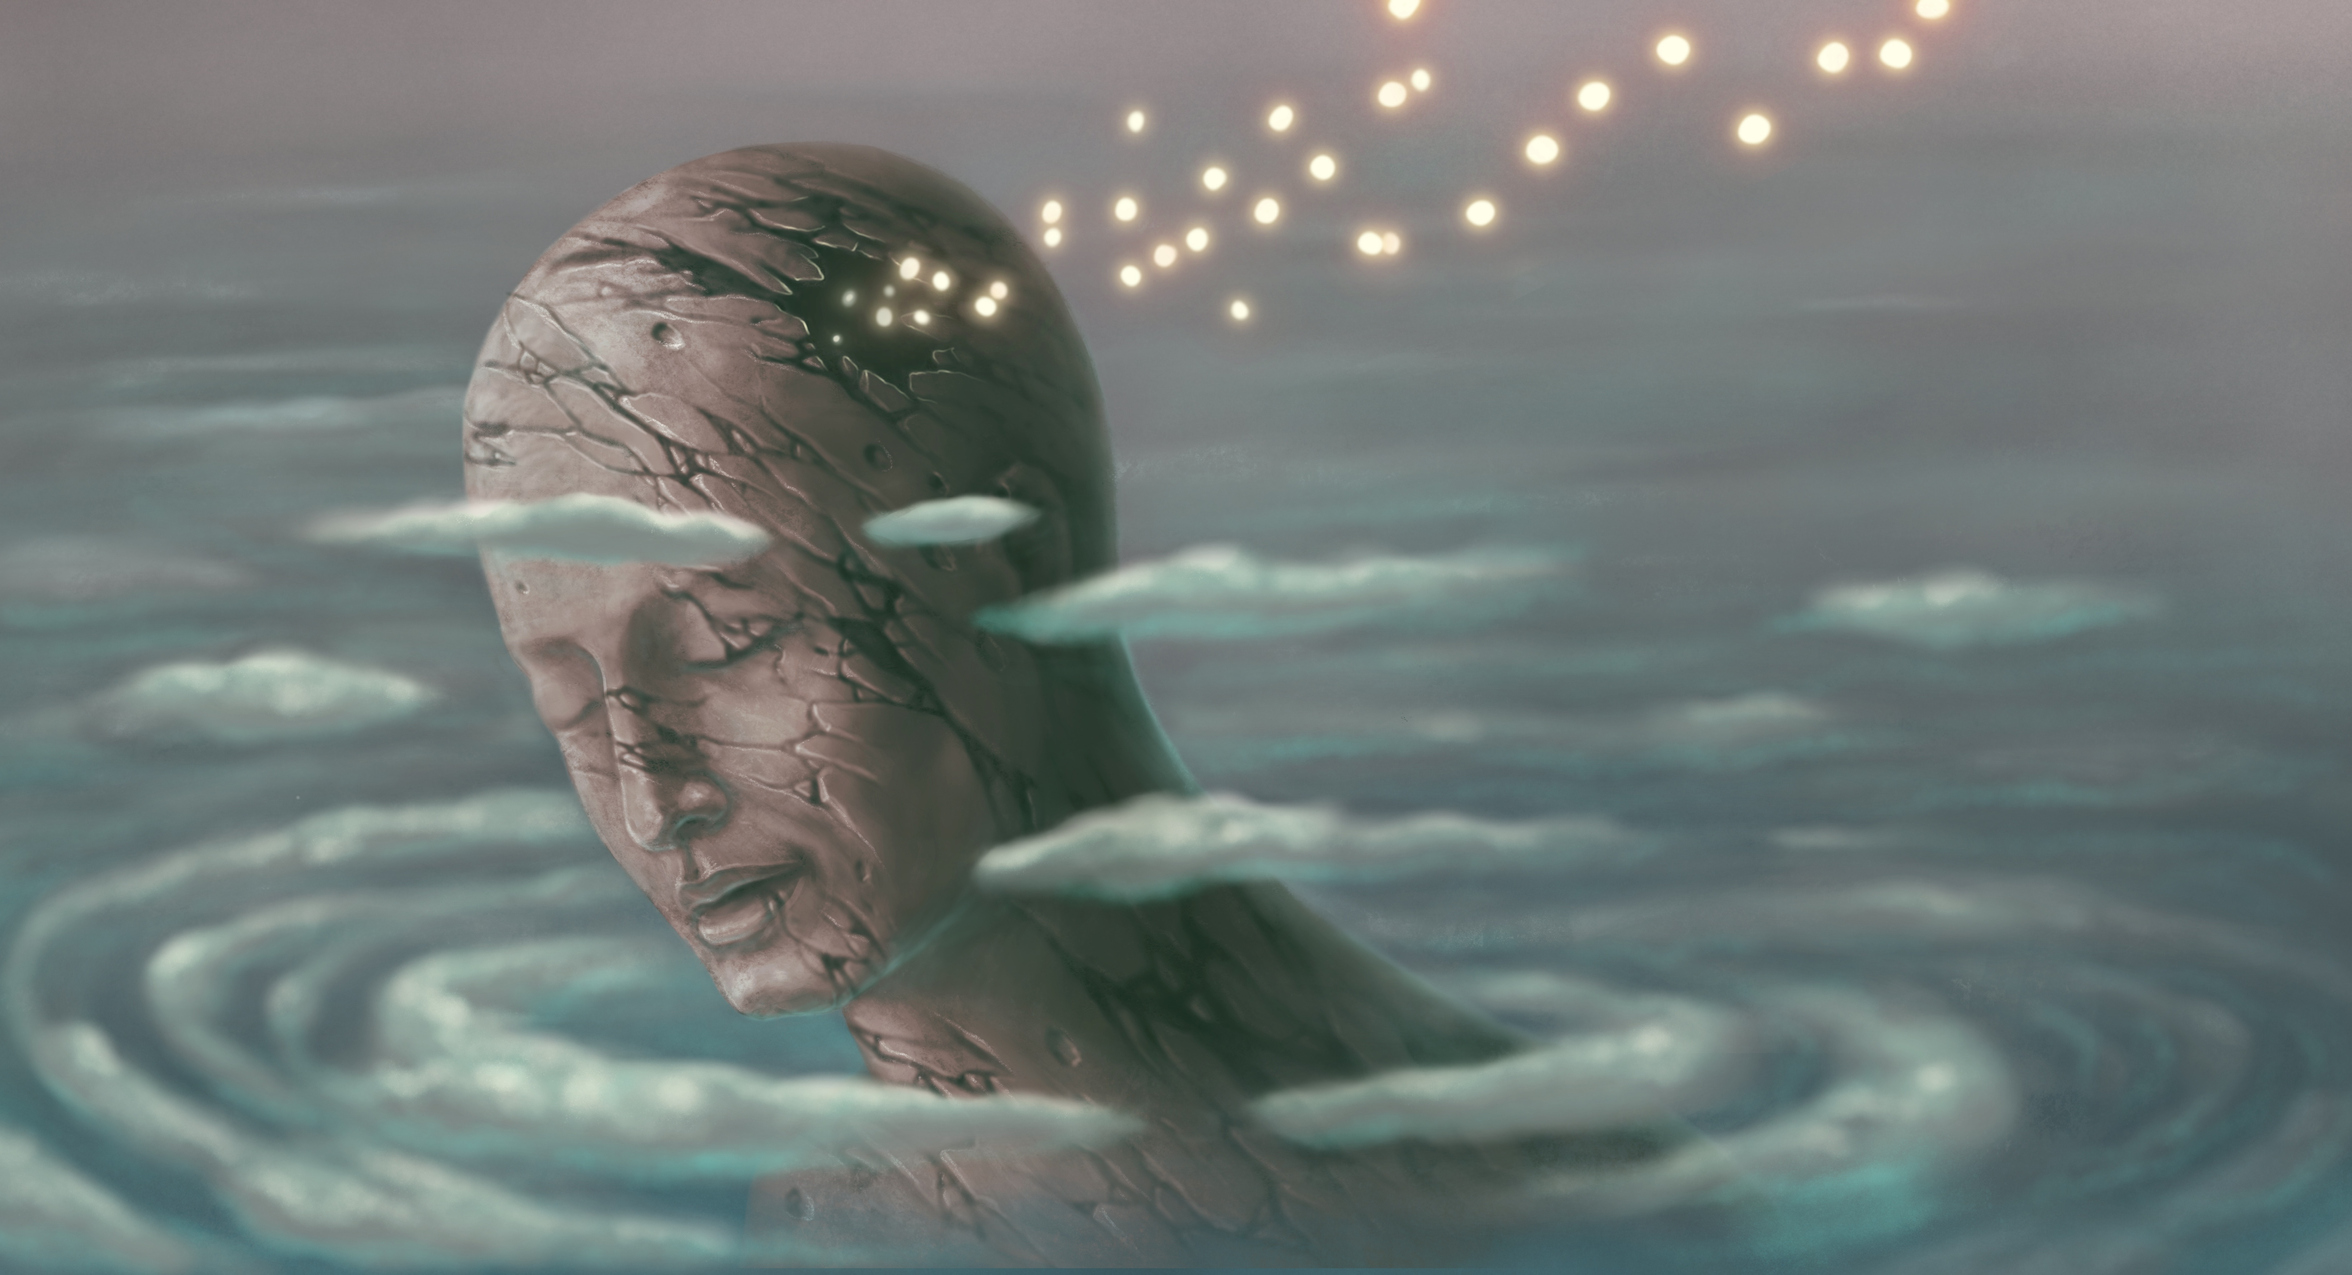 Stone person in water with swirling clouds and light emanating from them